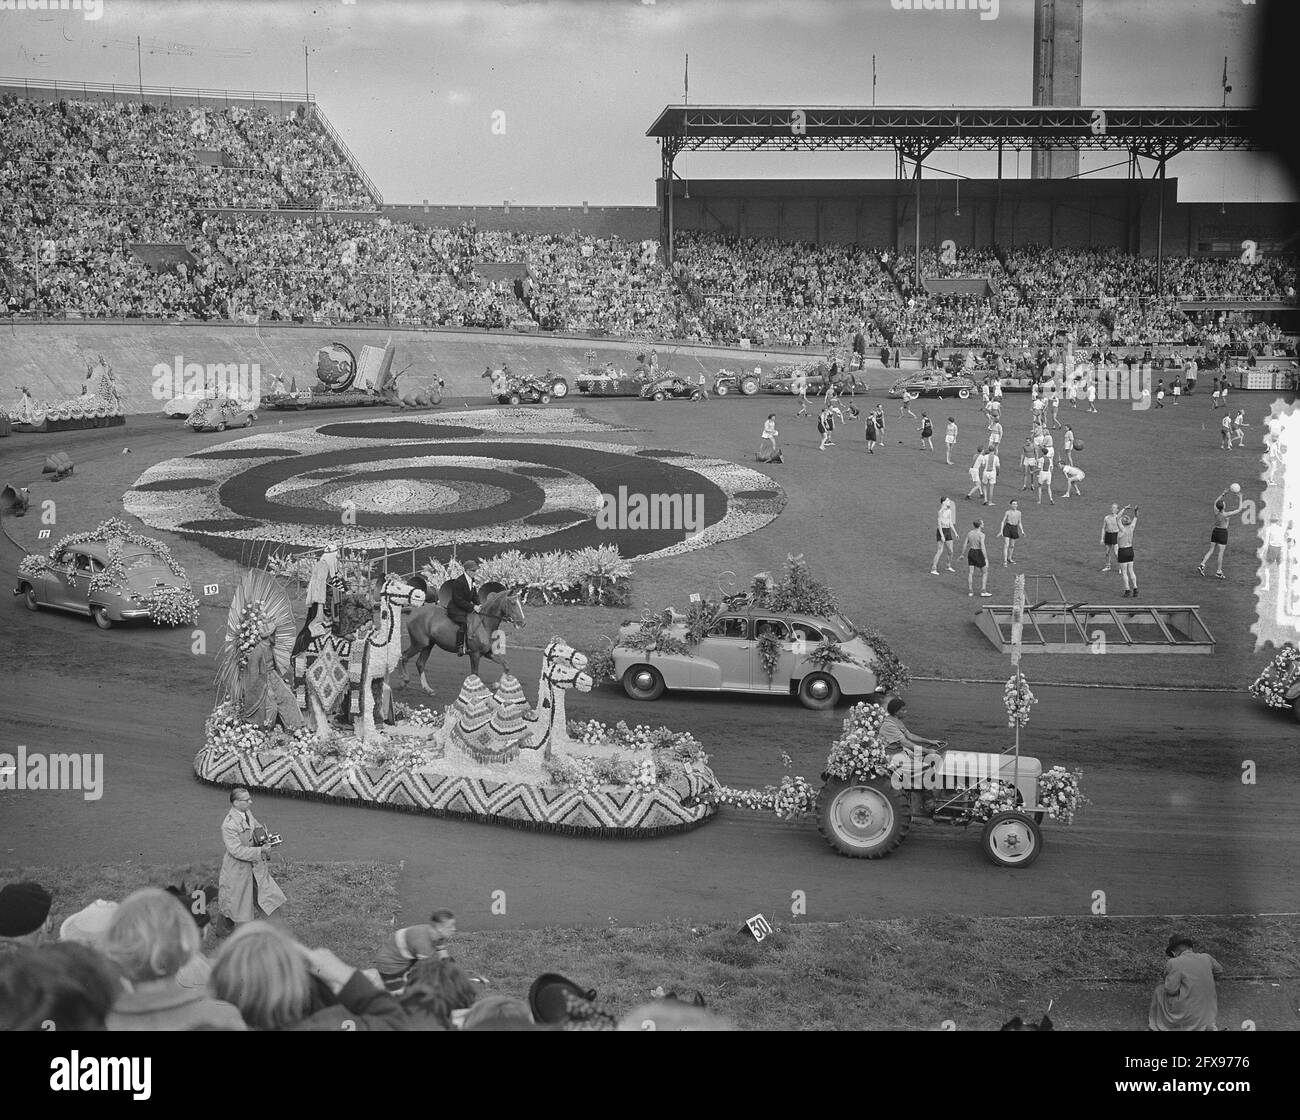 Bloemencorso Stadion Amsterdam, September 6, 1952, parades, stadiums, The Netherlands, 20th century press agency photo, news to remember, documentary, historic photography 1945-1990, visual stories, human history of the Twentieth Century, capturing moments in time Stock Photo